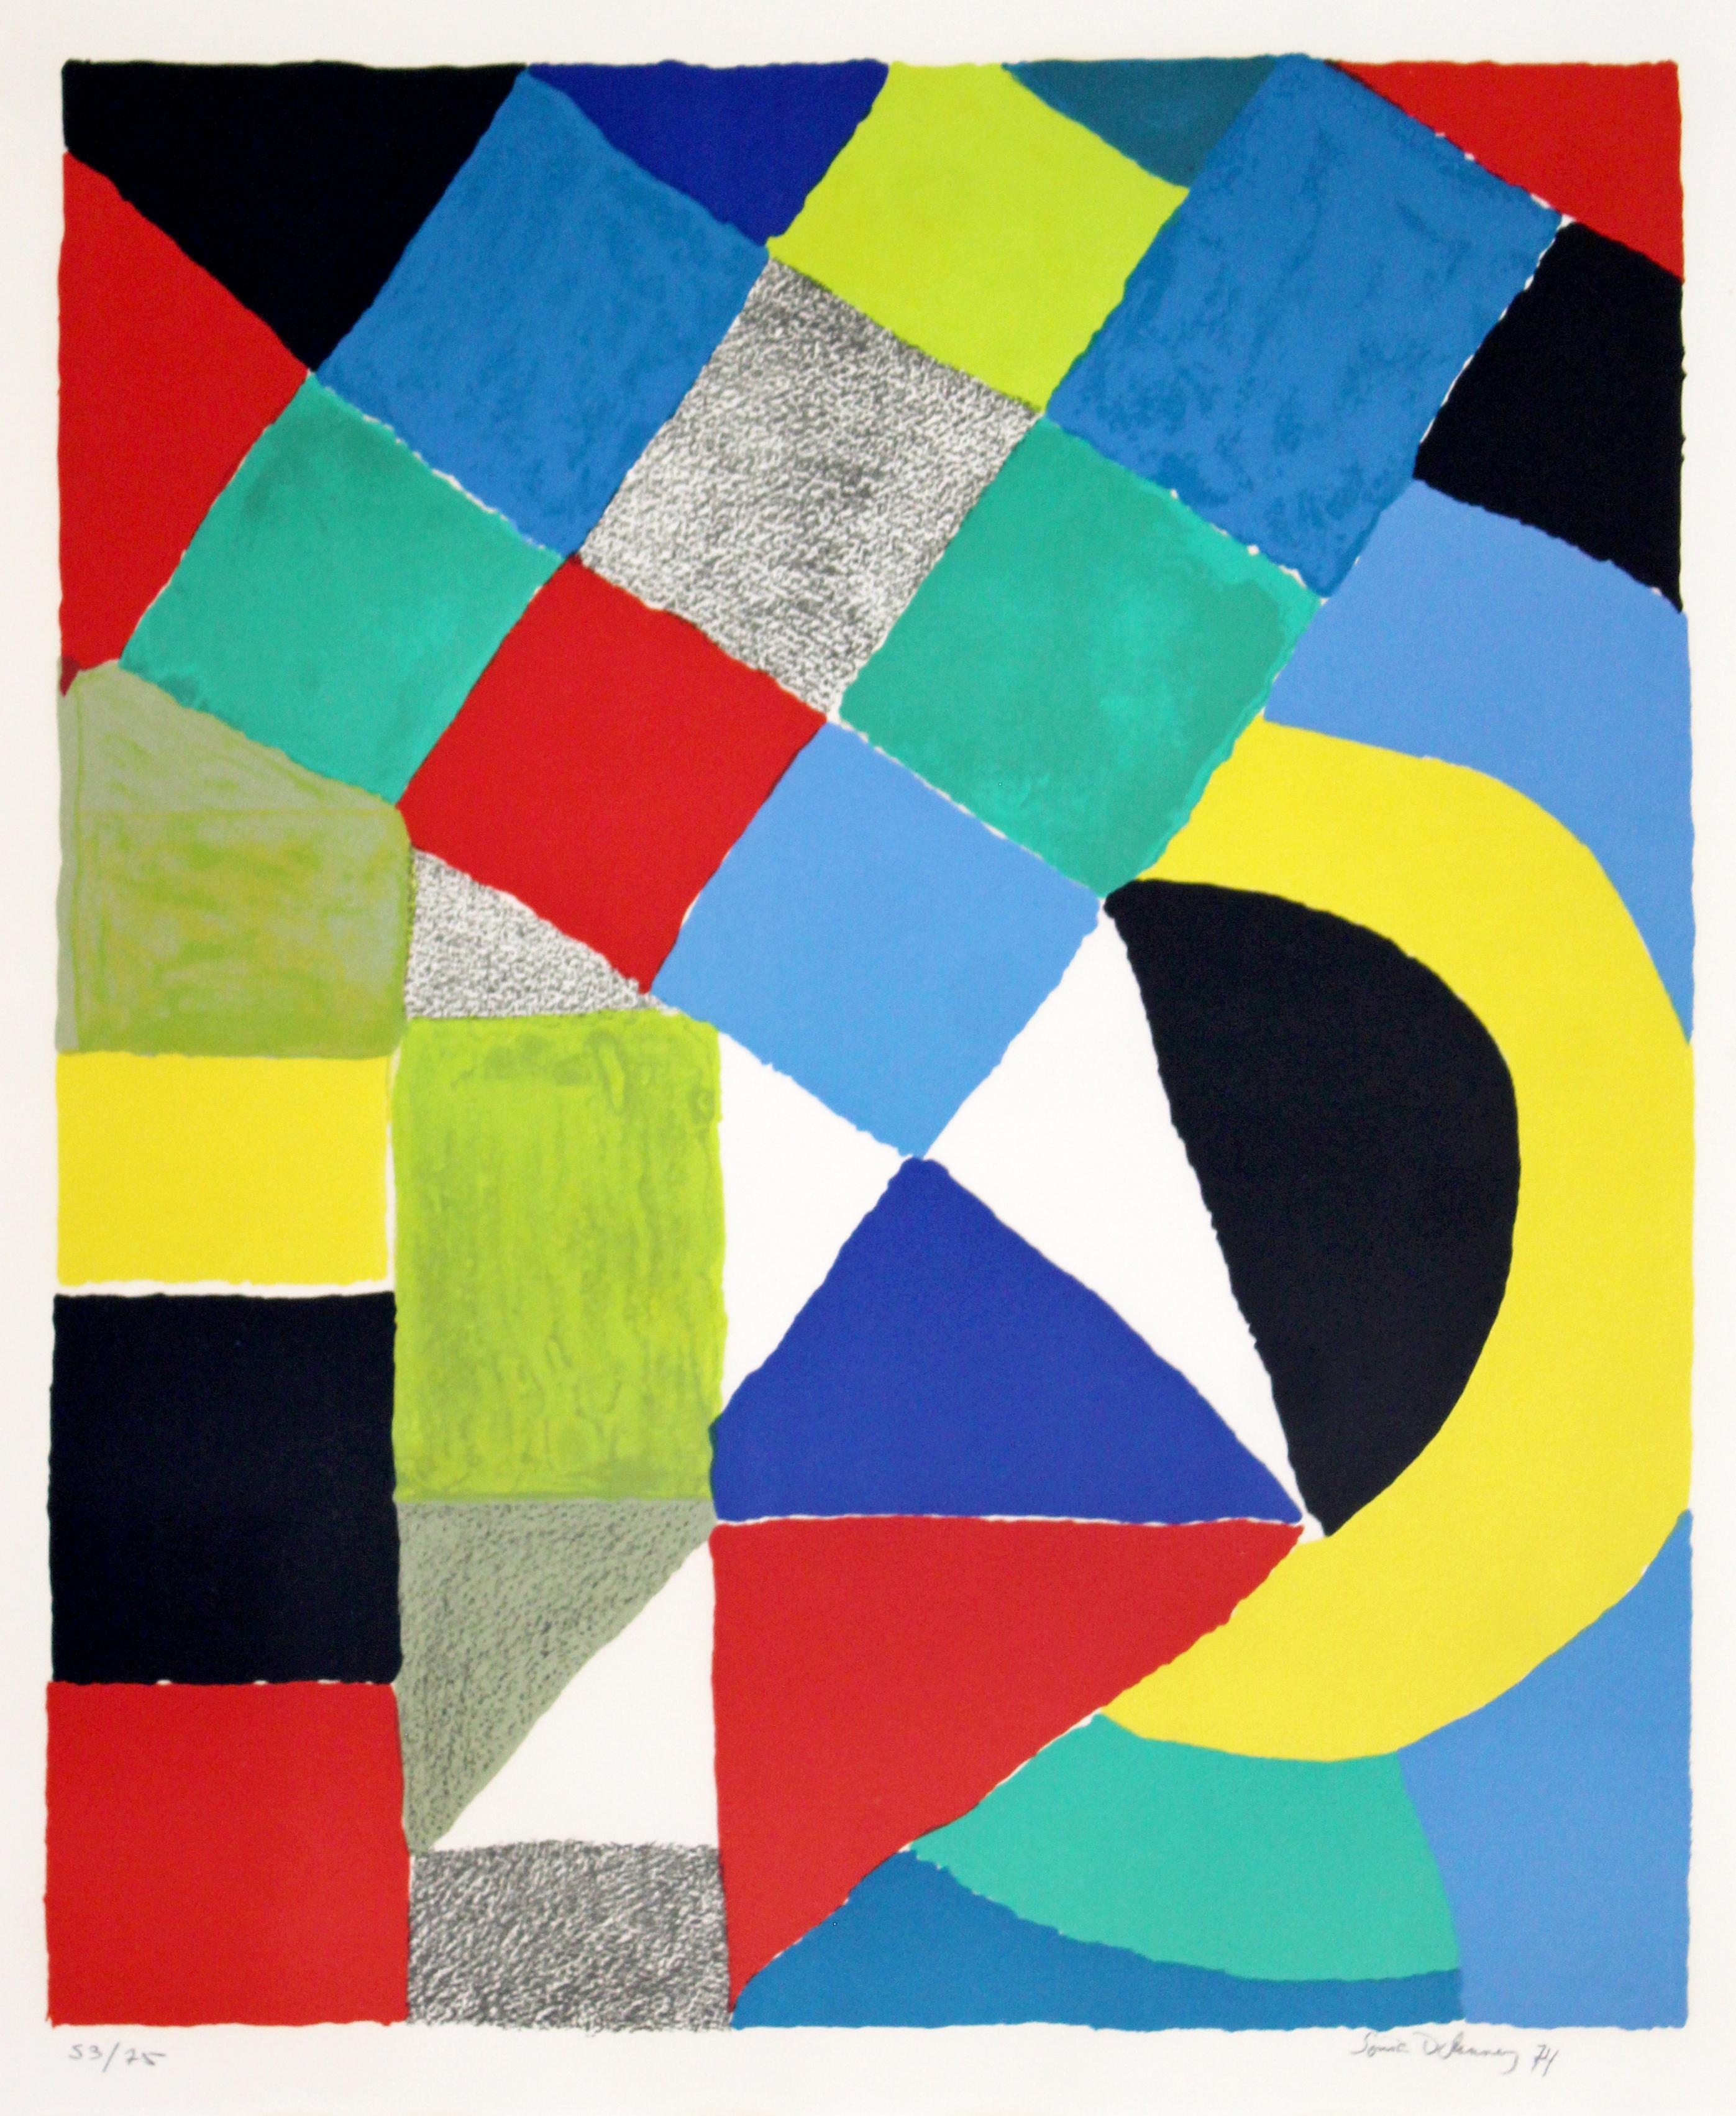 For your consideration is a phenomenal, framed abstract lithograph, signed by Sonia Delaunay Arlequin, numbered 53/75 with 25 H.C. numbered in Roman numerals, dated 1974. In excellent condition. The dimensions of the frame are 27.5